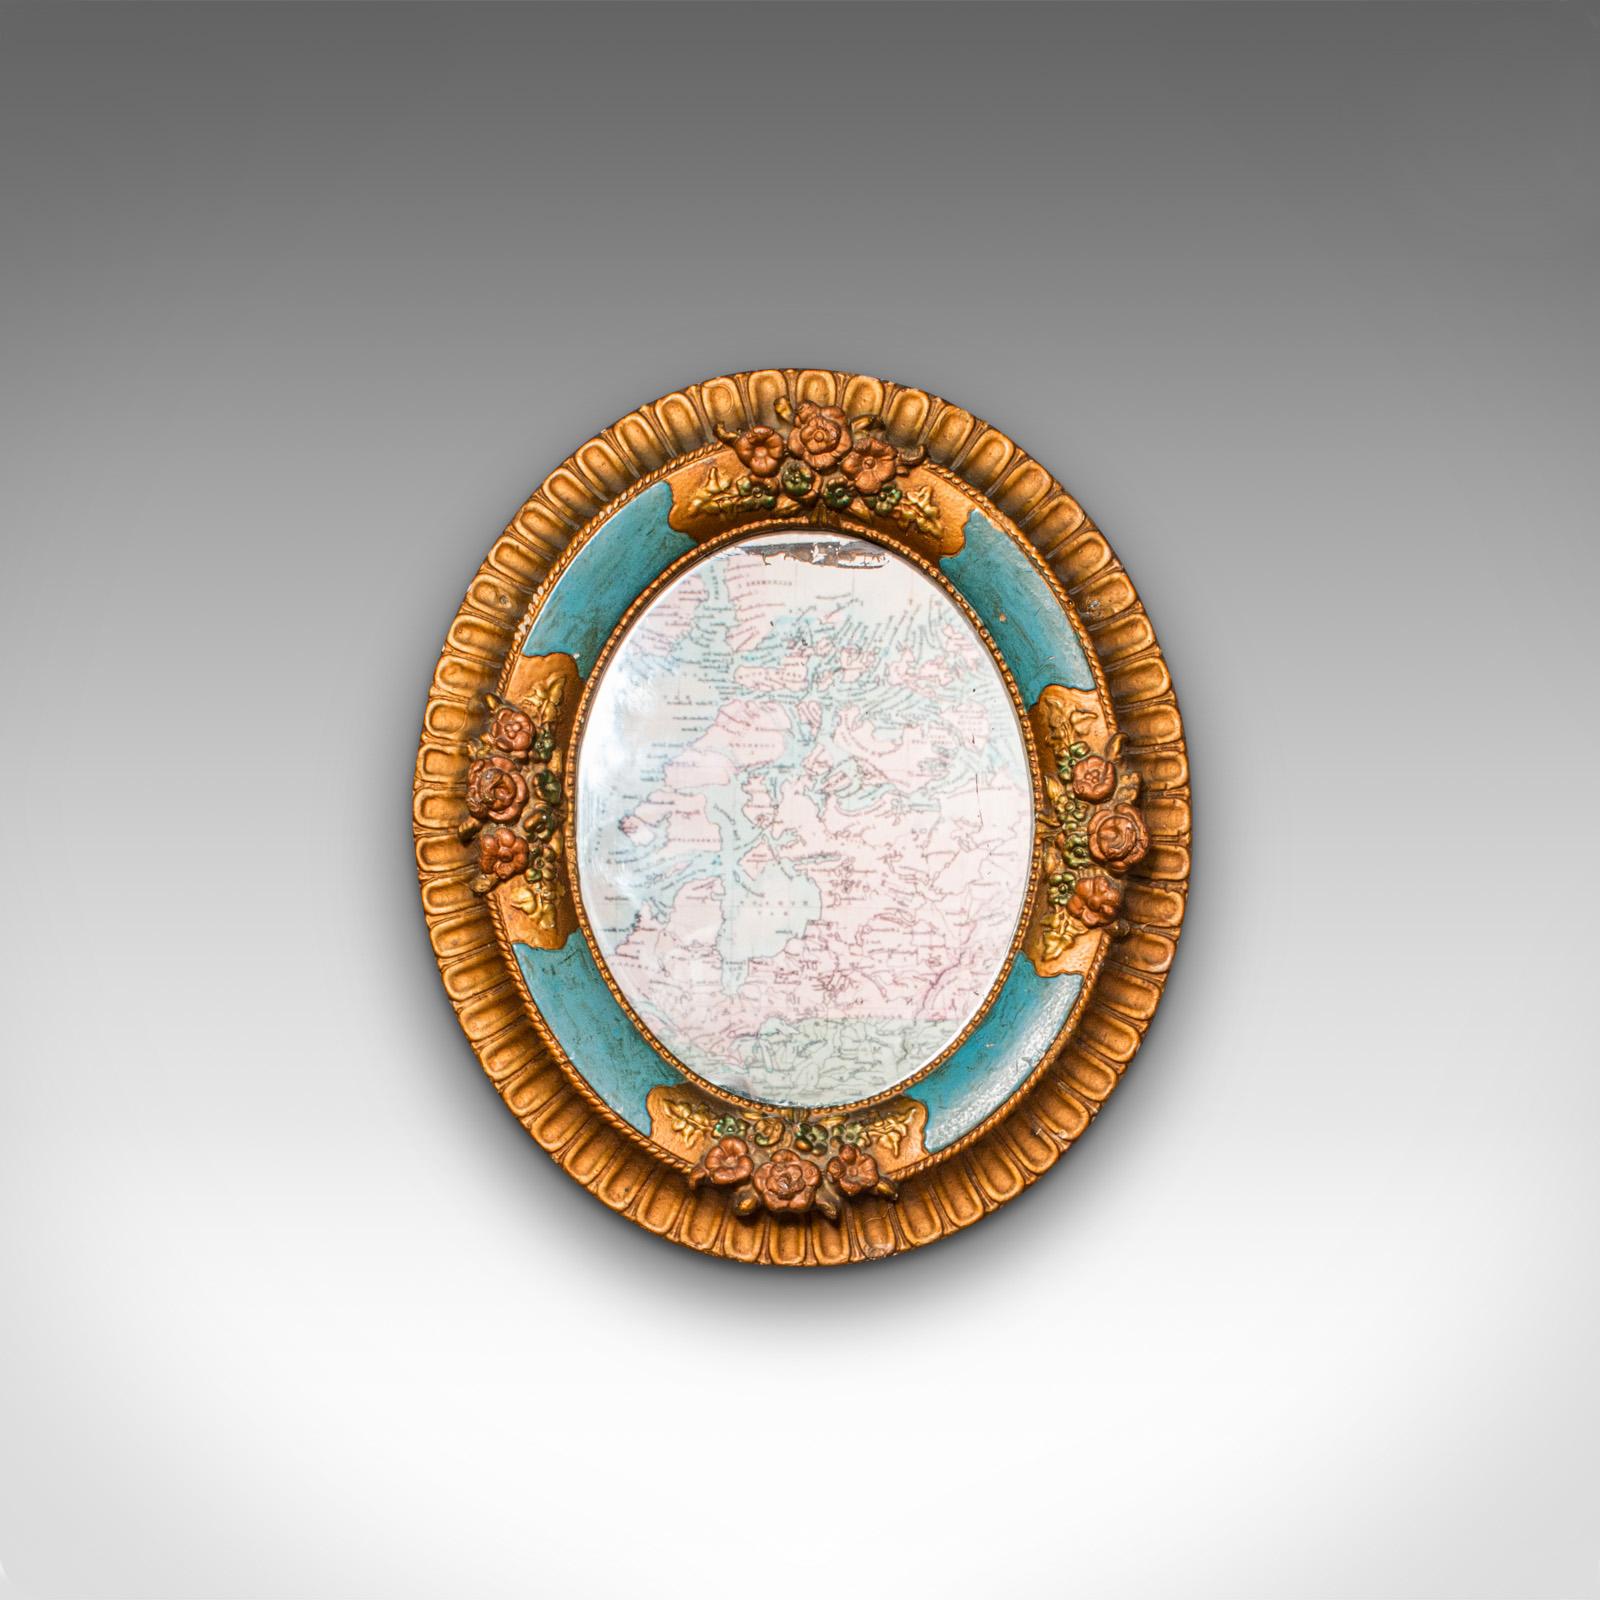 This is an antique decorative wall mirror. A German, plaster and gilt finished oval mirror in the manner of the Black Forest, dating to the late Victorian period, circa 1900.

Pleasingly expressive and colorful form with Black Forest